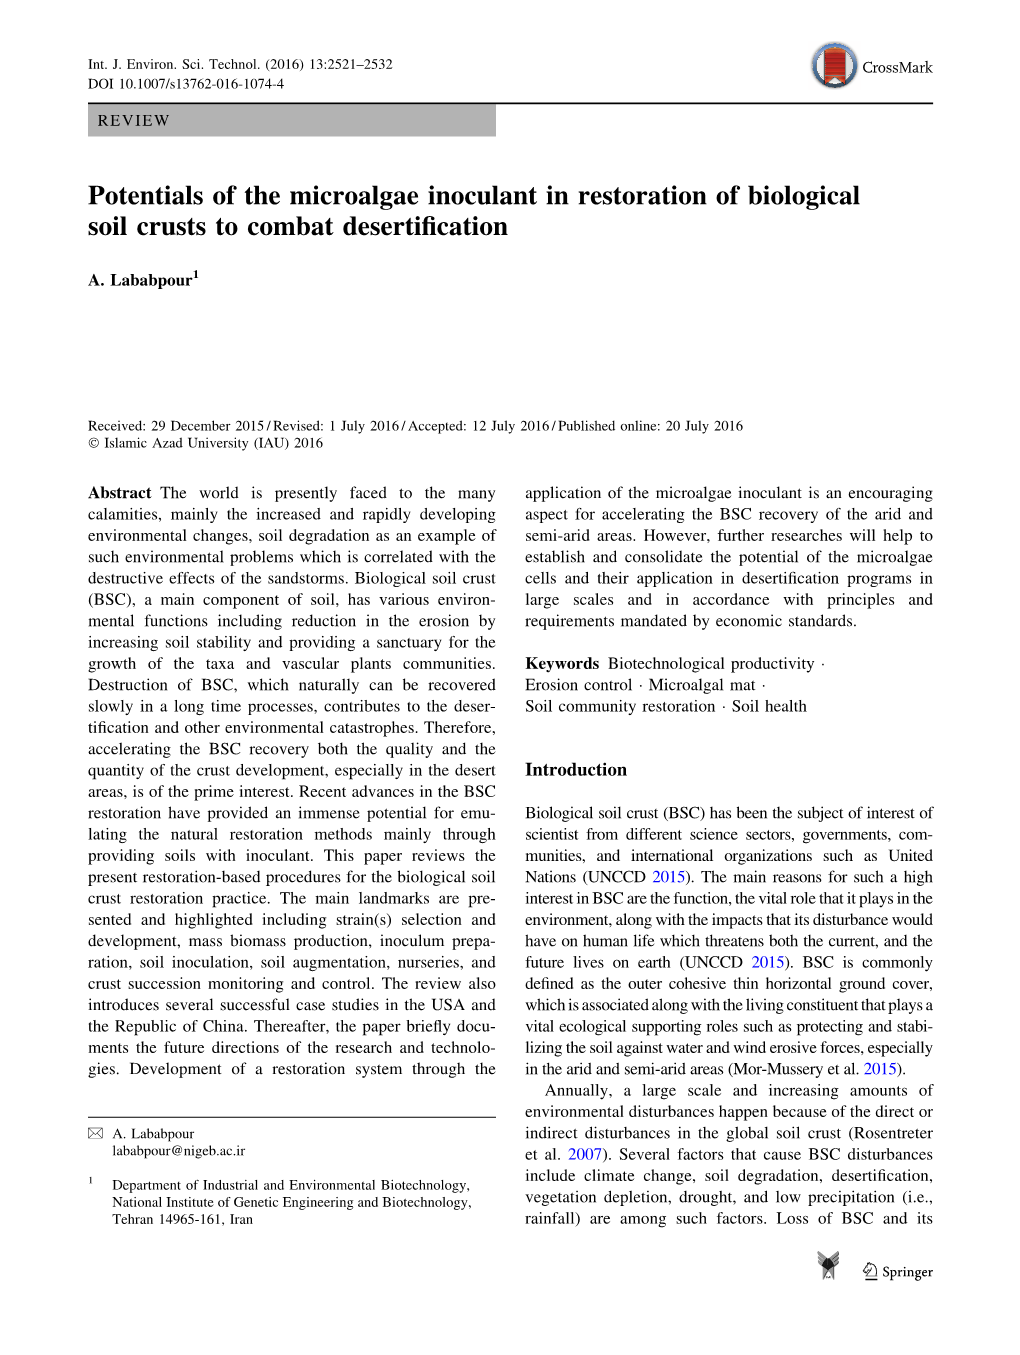 Potentials of the Microalgae Inoculant in Restoration of Biological Soil Crusts to Combat Desertiﬁcation